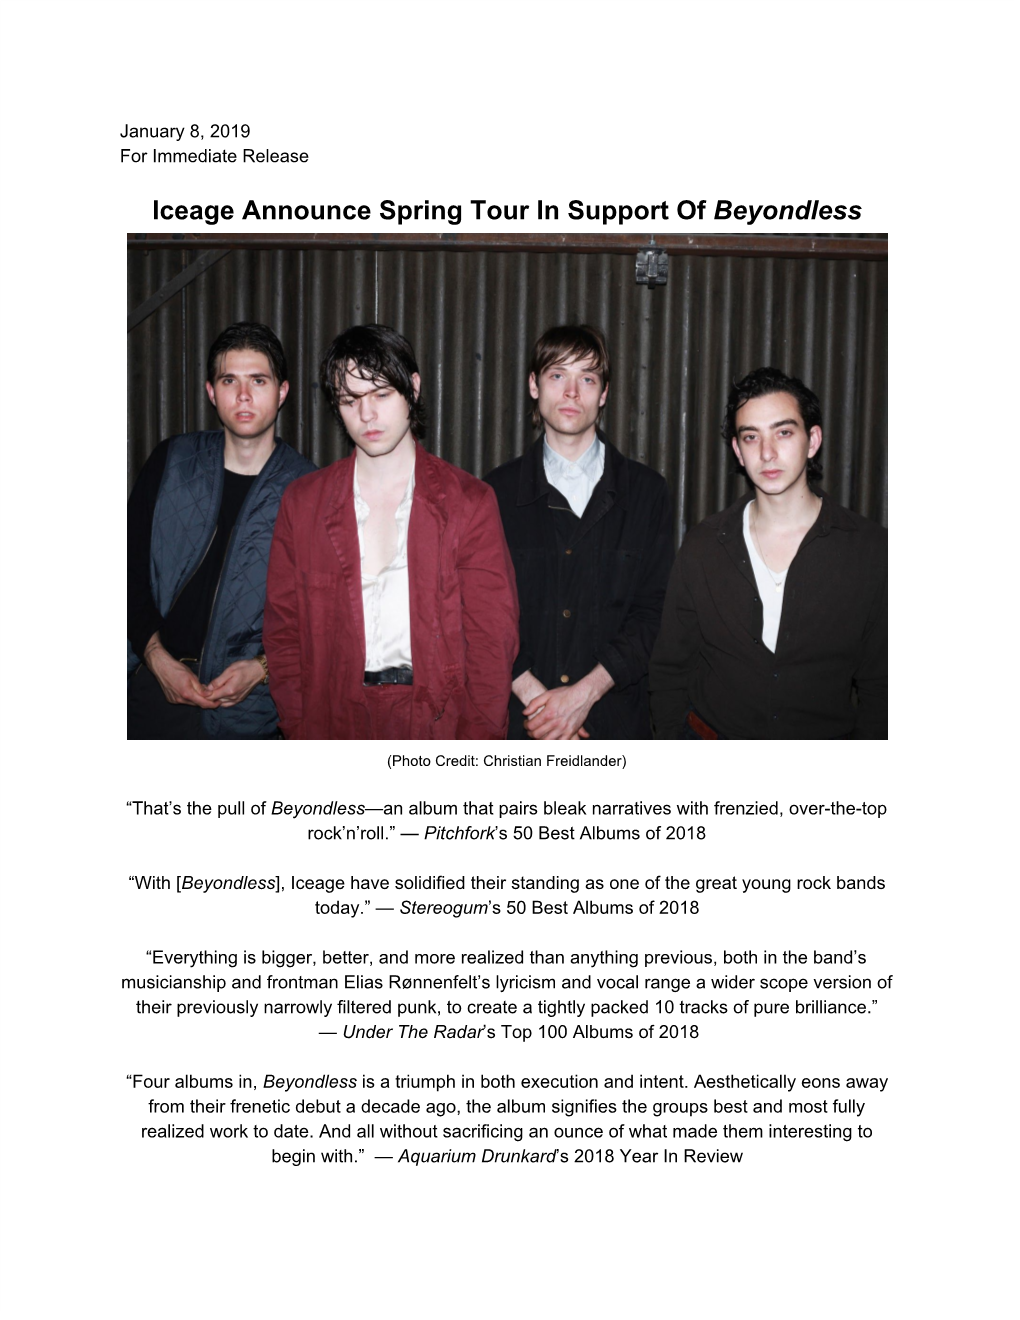 January 8, 2019 Iceage Announce Spring Tour in Support of Beyondless